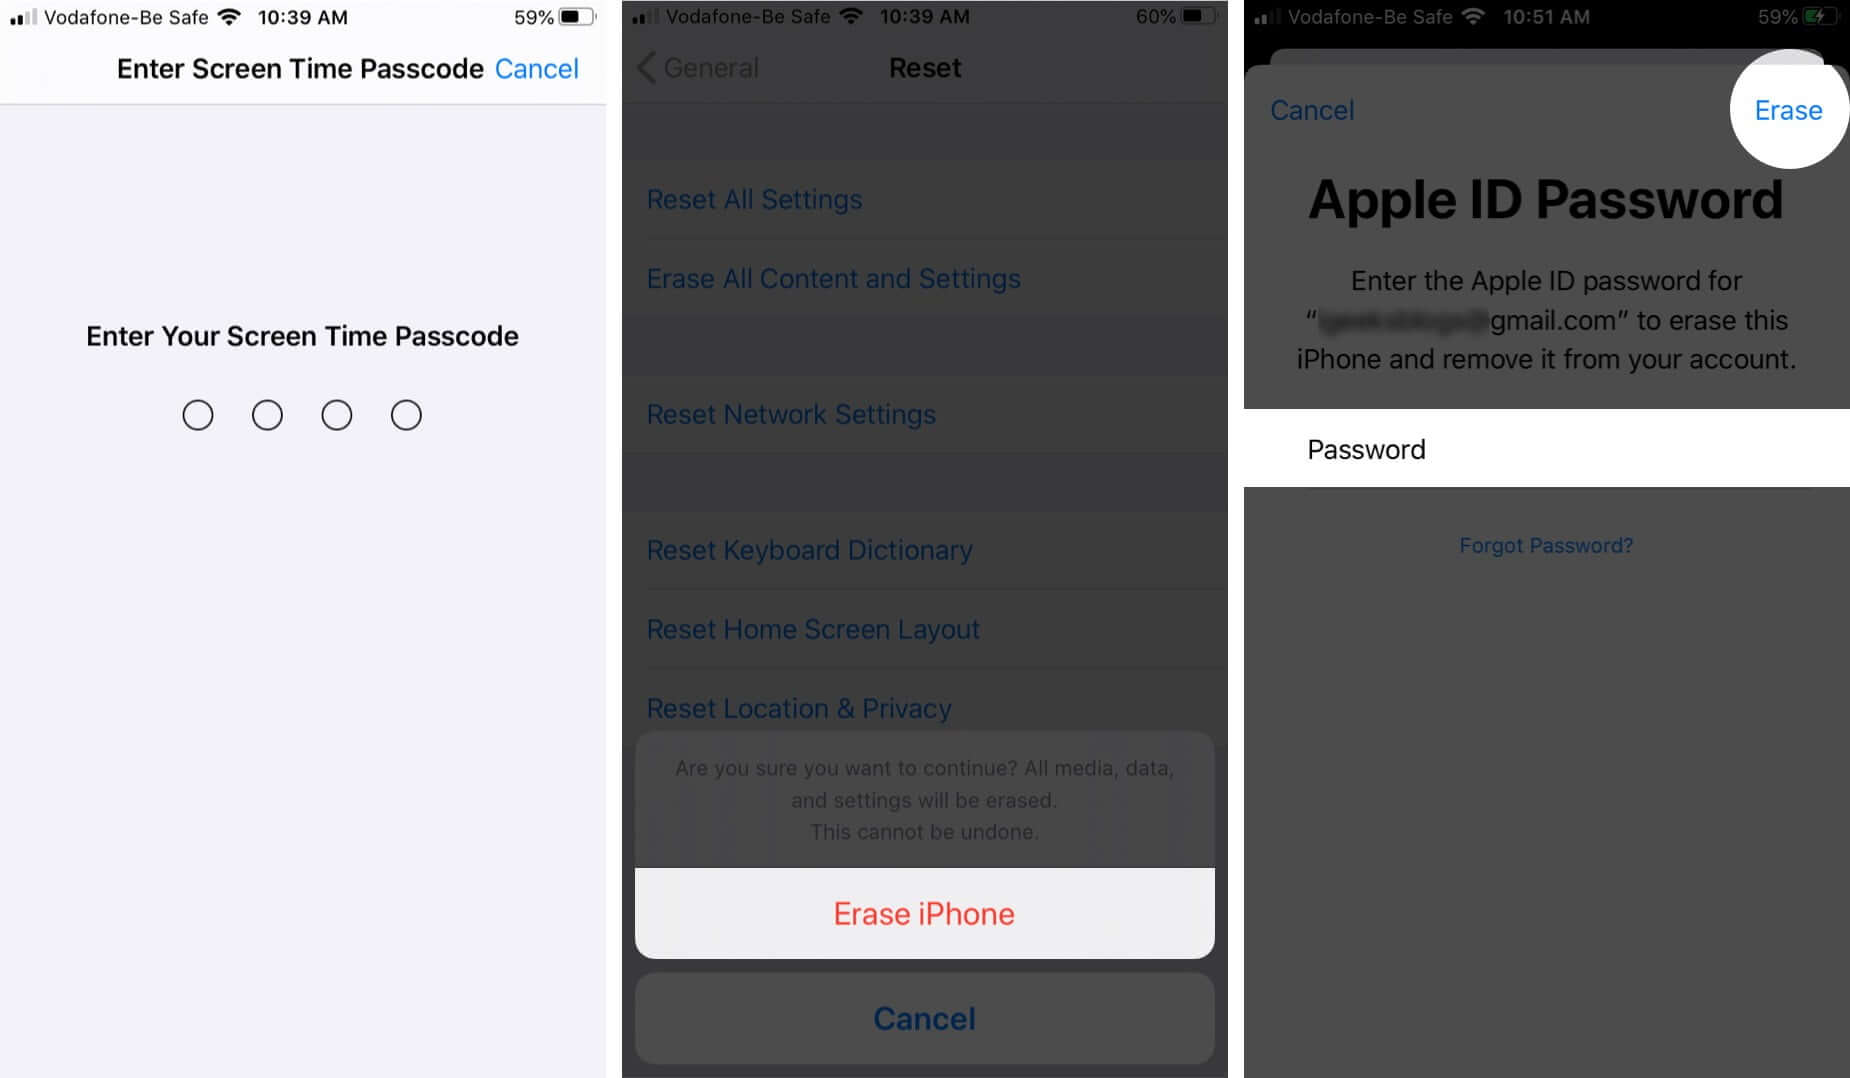 use-screen-time-passcode-toque-on-erase-iphone-e-ingrese-apple-id-password-and-toque-on-erase